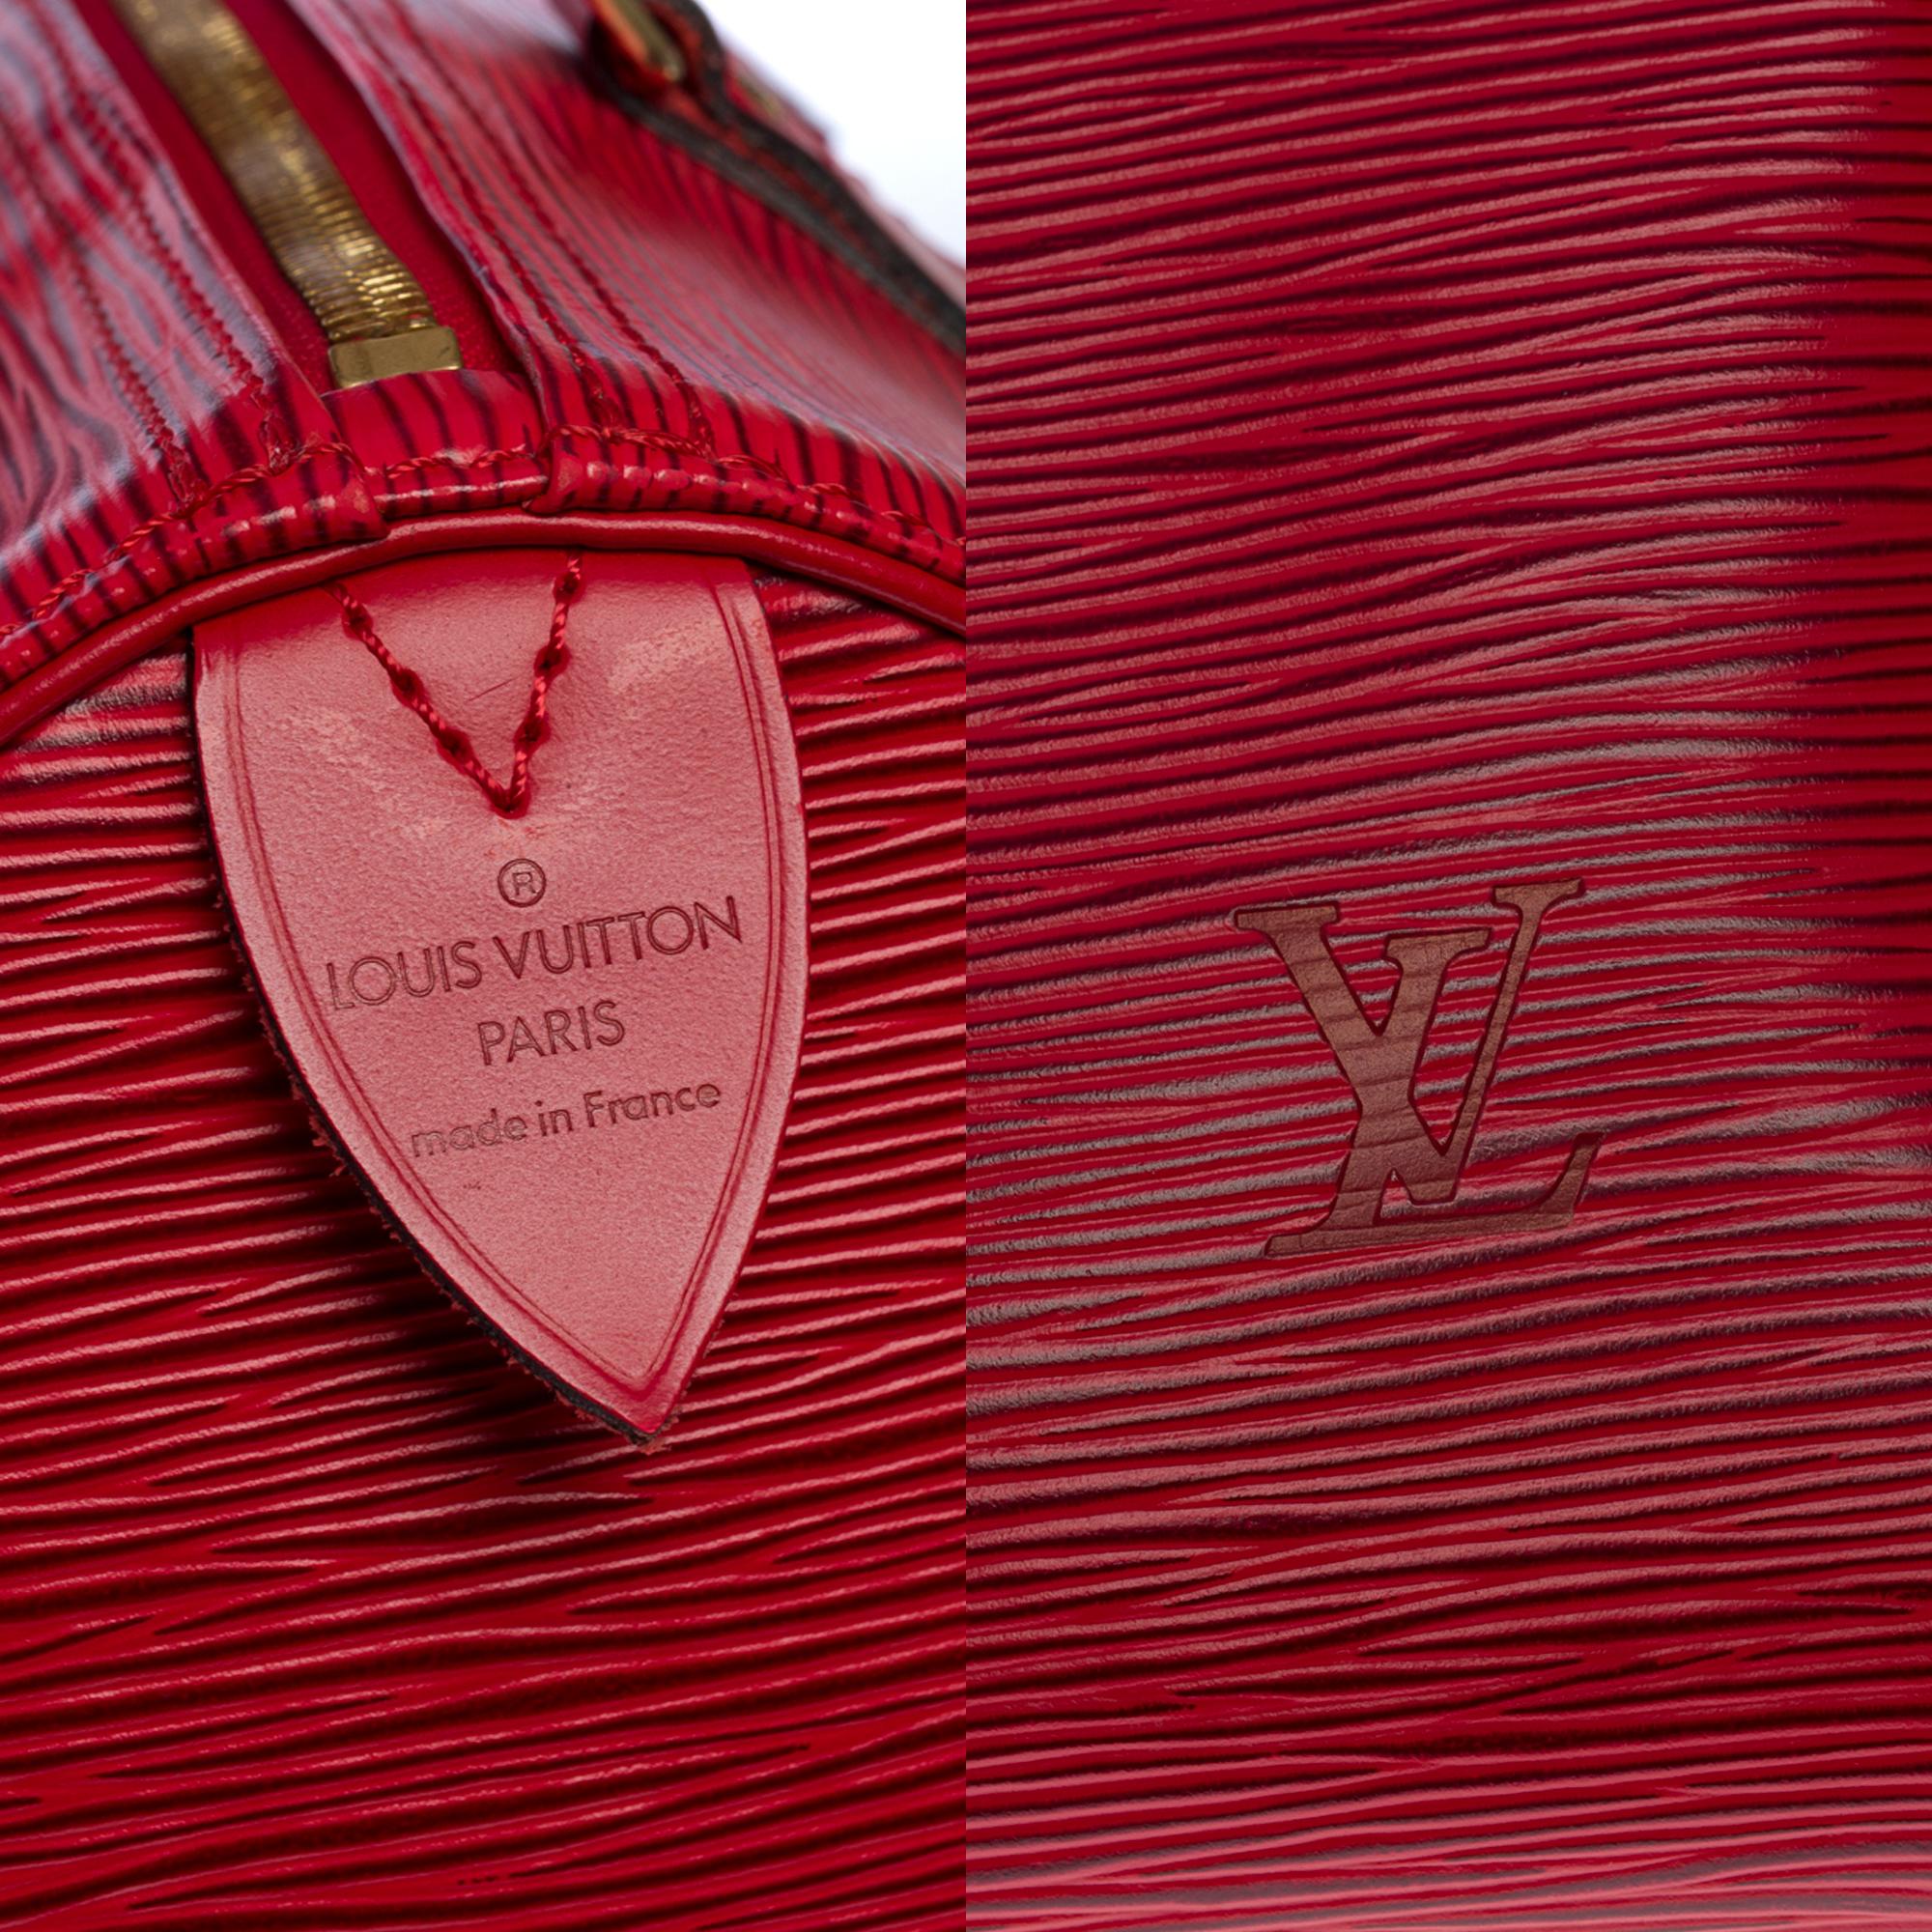 Gorgeous Louis Vuitton Speedy 30 handbag in red épi leather and gold hardware 1